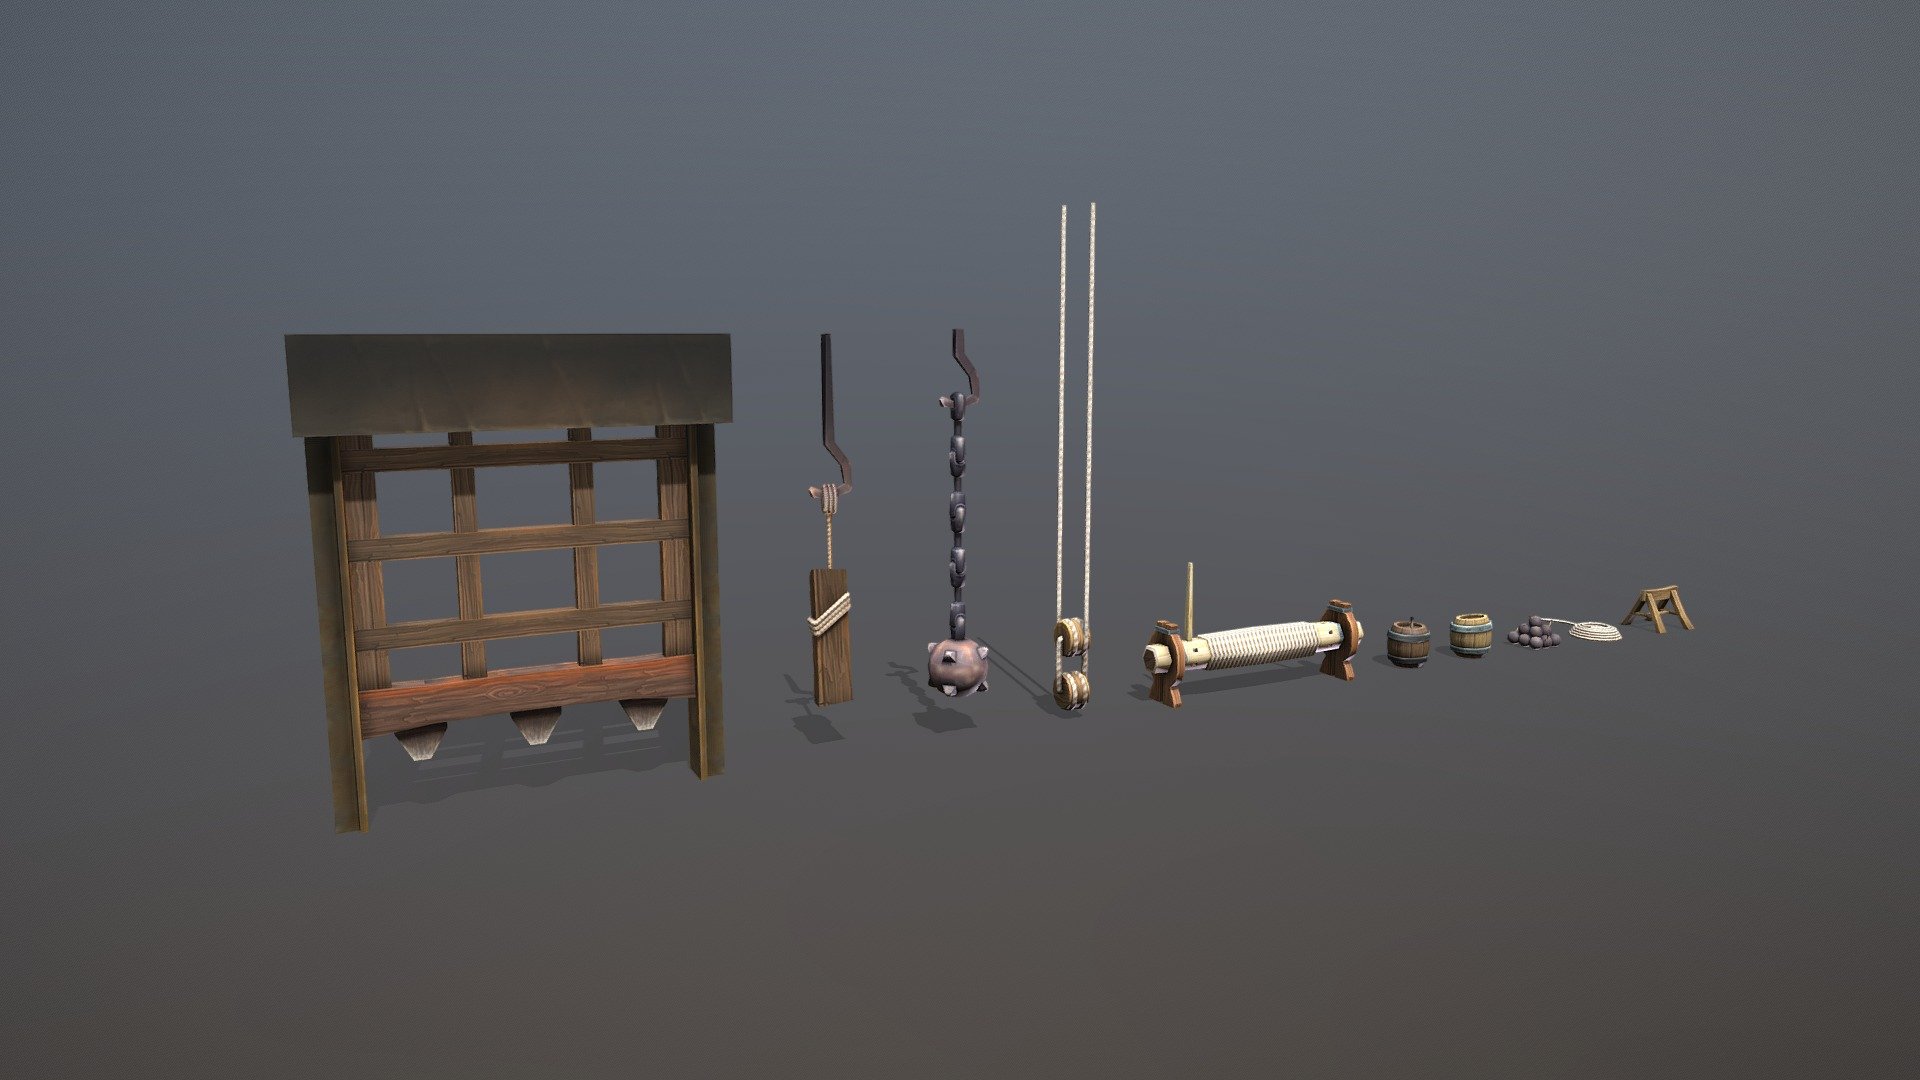 PirateCollection_Items

All Objects - (triangles 6238) / (points 3457)

Low-poly 3D models for game
- Gate (triangles 530)
- Hook (triangles 416)
- Chain (triangles 828)
- Blok (triangles 752)
- Winch (triangles 848)
- GunPowderBarrel (triangles 374)
- Barrel (triangles 332)
- CannonBalls (triangles 1106f)
- Rope (triangles 884)
- Barrier (triangles 168)

Textures  diffuse 
- PirateCollection_Items_Winch.png      512x512
- PirateCollection_Items_Rope.png       256x256
- PirateCollection_Items_GunPowderBarrel.png    512x512 
- PirateCollection_Items_Gate.png       512x512
- PirateCollection_Items_Chain.png      256x256
- PirateCollection_Items_CannonBalls.png    512x512 
- PirateCollection_Items_Blok.png       256x256 
- PirateCollection_Items_Barrier.png        512x512
- PirateCollection_Items_Barrel.png     512x512         

If you have questions about my models or need any kind of help, feel free to contact me and i'll do my best to help you 3d model